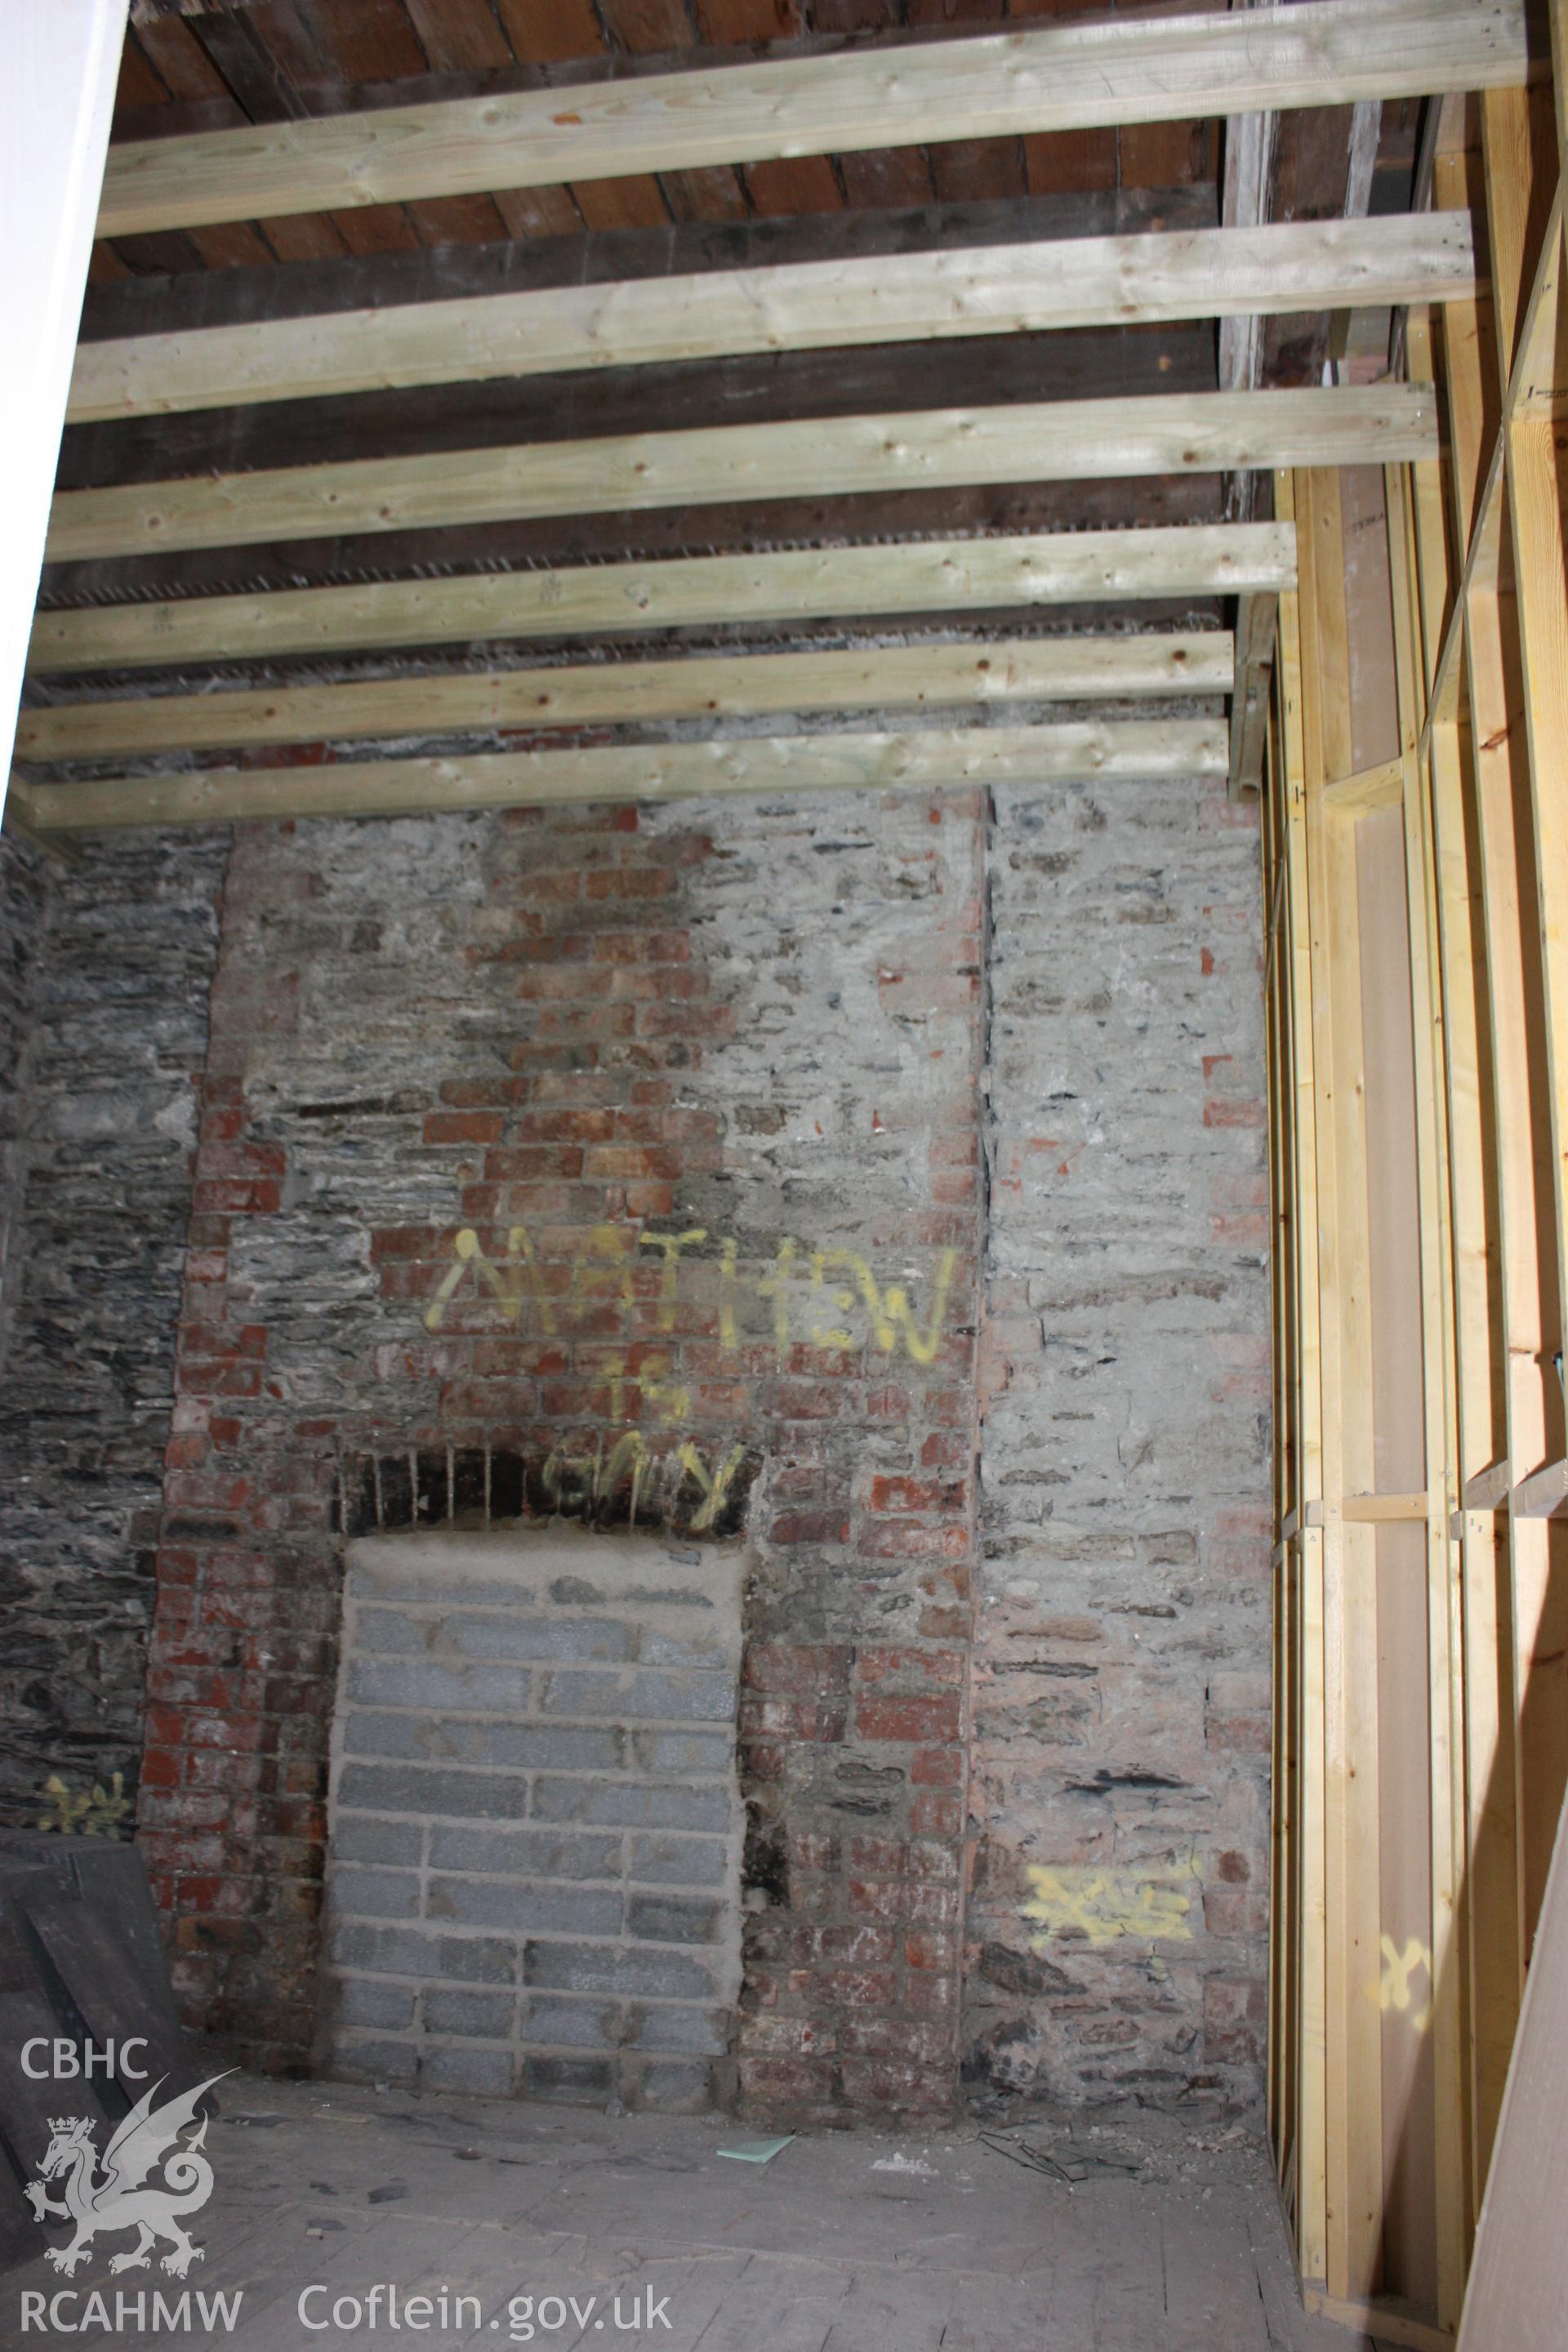 Colour photograph showing interior view of bricked up fireplace on the second floor of the Old Auction Rooms/ Liberal Club in Aberystwyth. Photographic survey conducted by Geoff Ward on 9th June 2010 during repair work prior to conversion into flats.